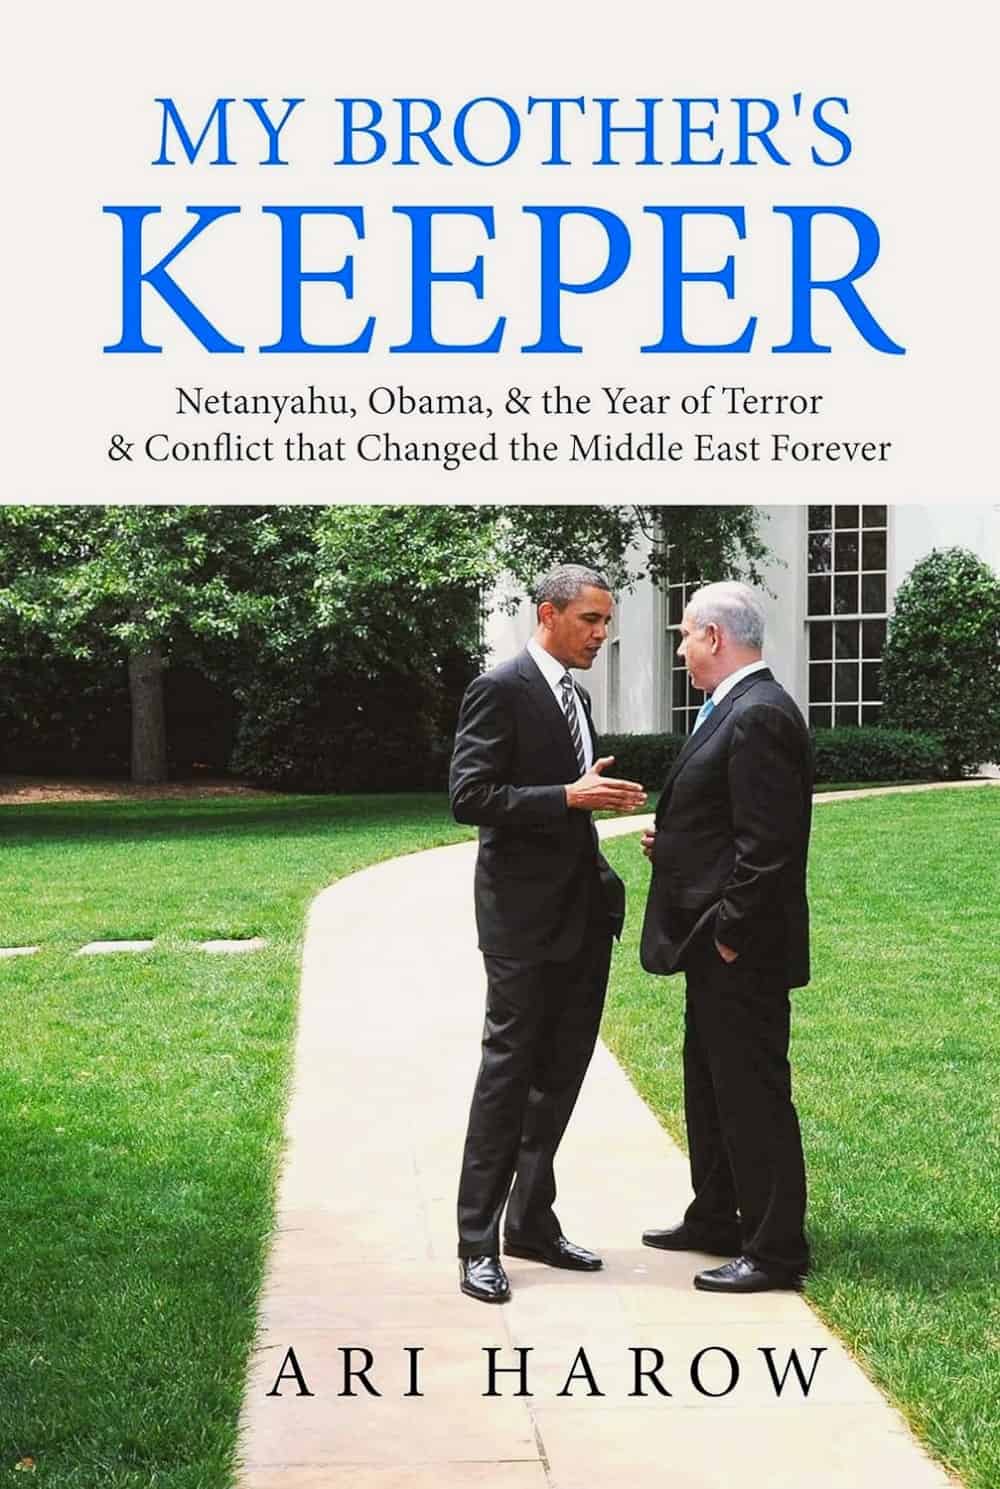 My Brother's Keeper book by Ari Harow